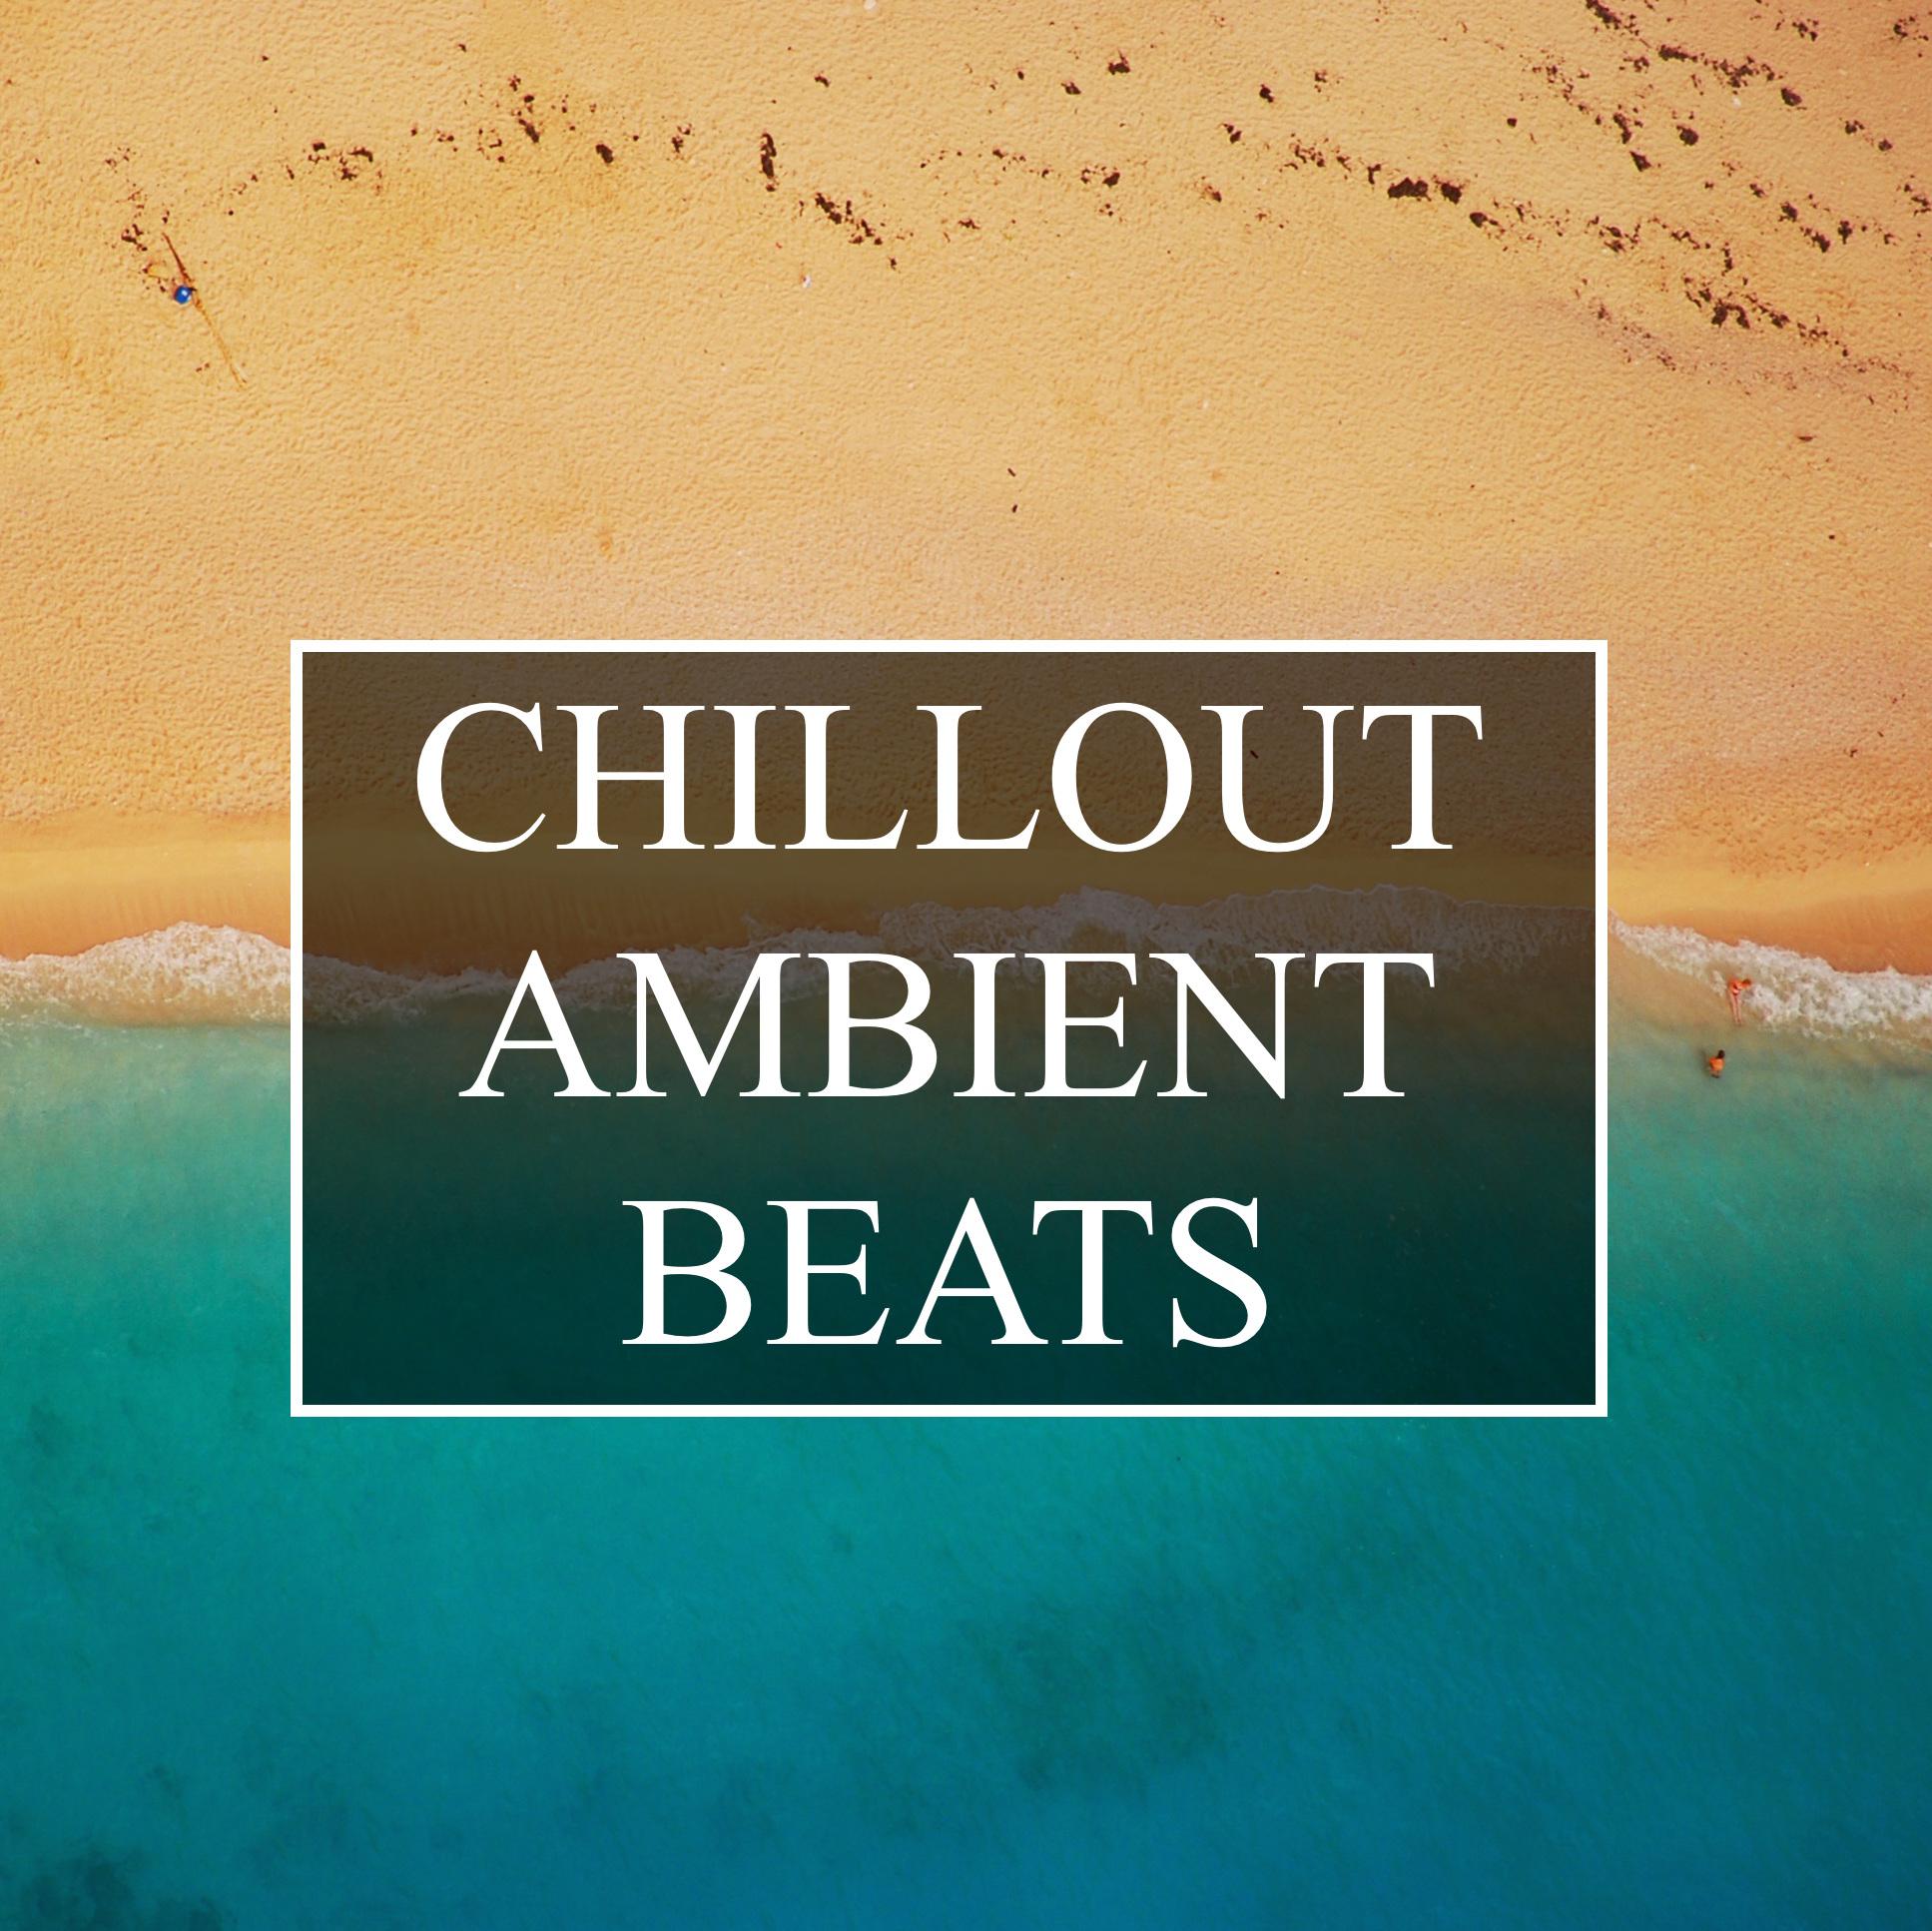 Chillout Ambient Beats - Ultimate Chill/Lounge Relaxation Collection for Good Vibes, Deep Focus, Background & Ambient Study Sessions, Stress & Anxiety Relief and Complete Mood Boost